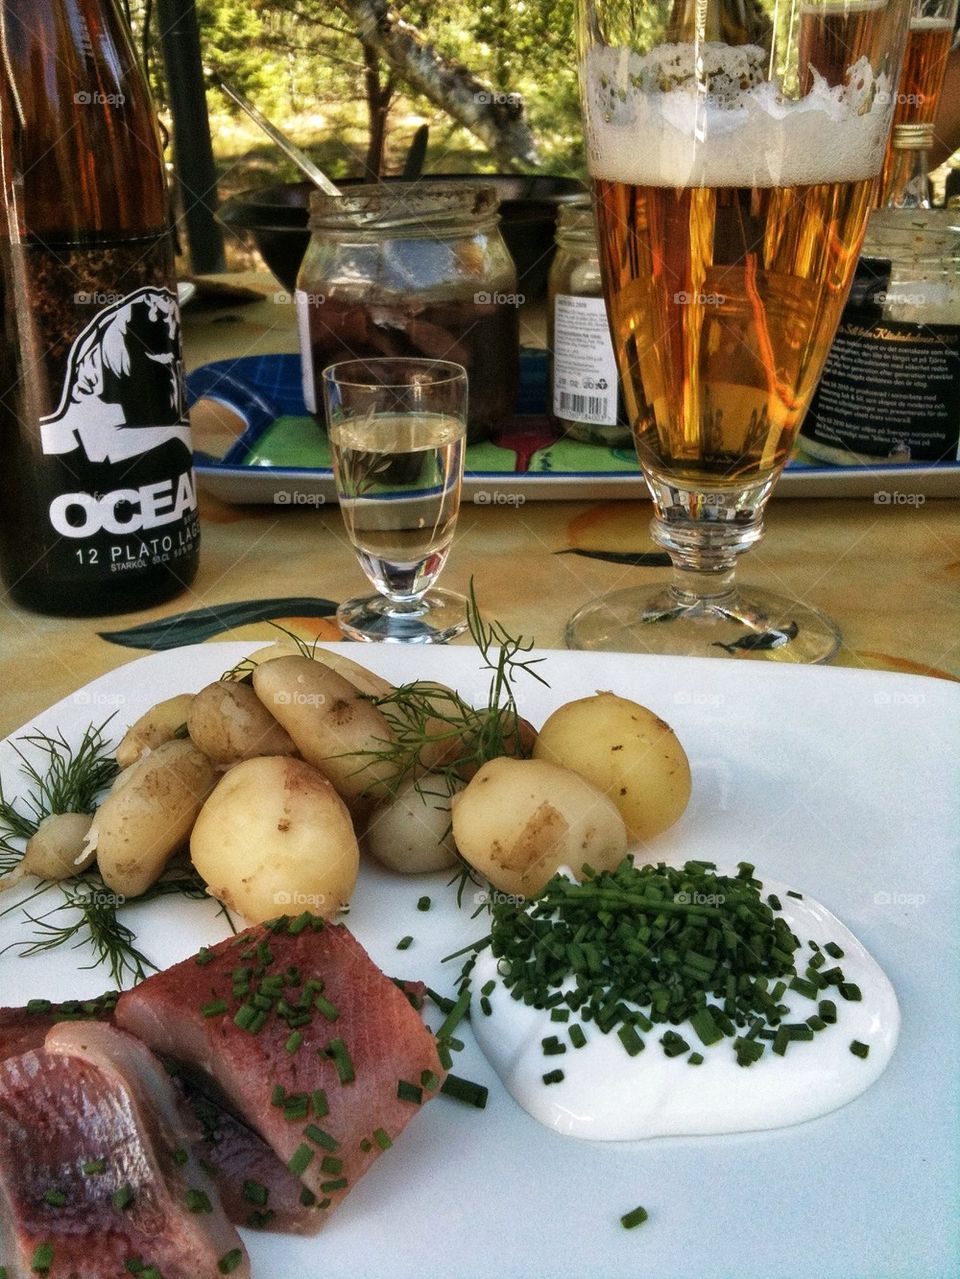 sweden outdoors food summer by mikael